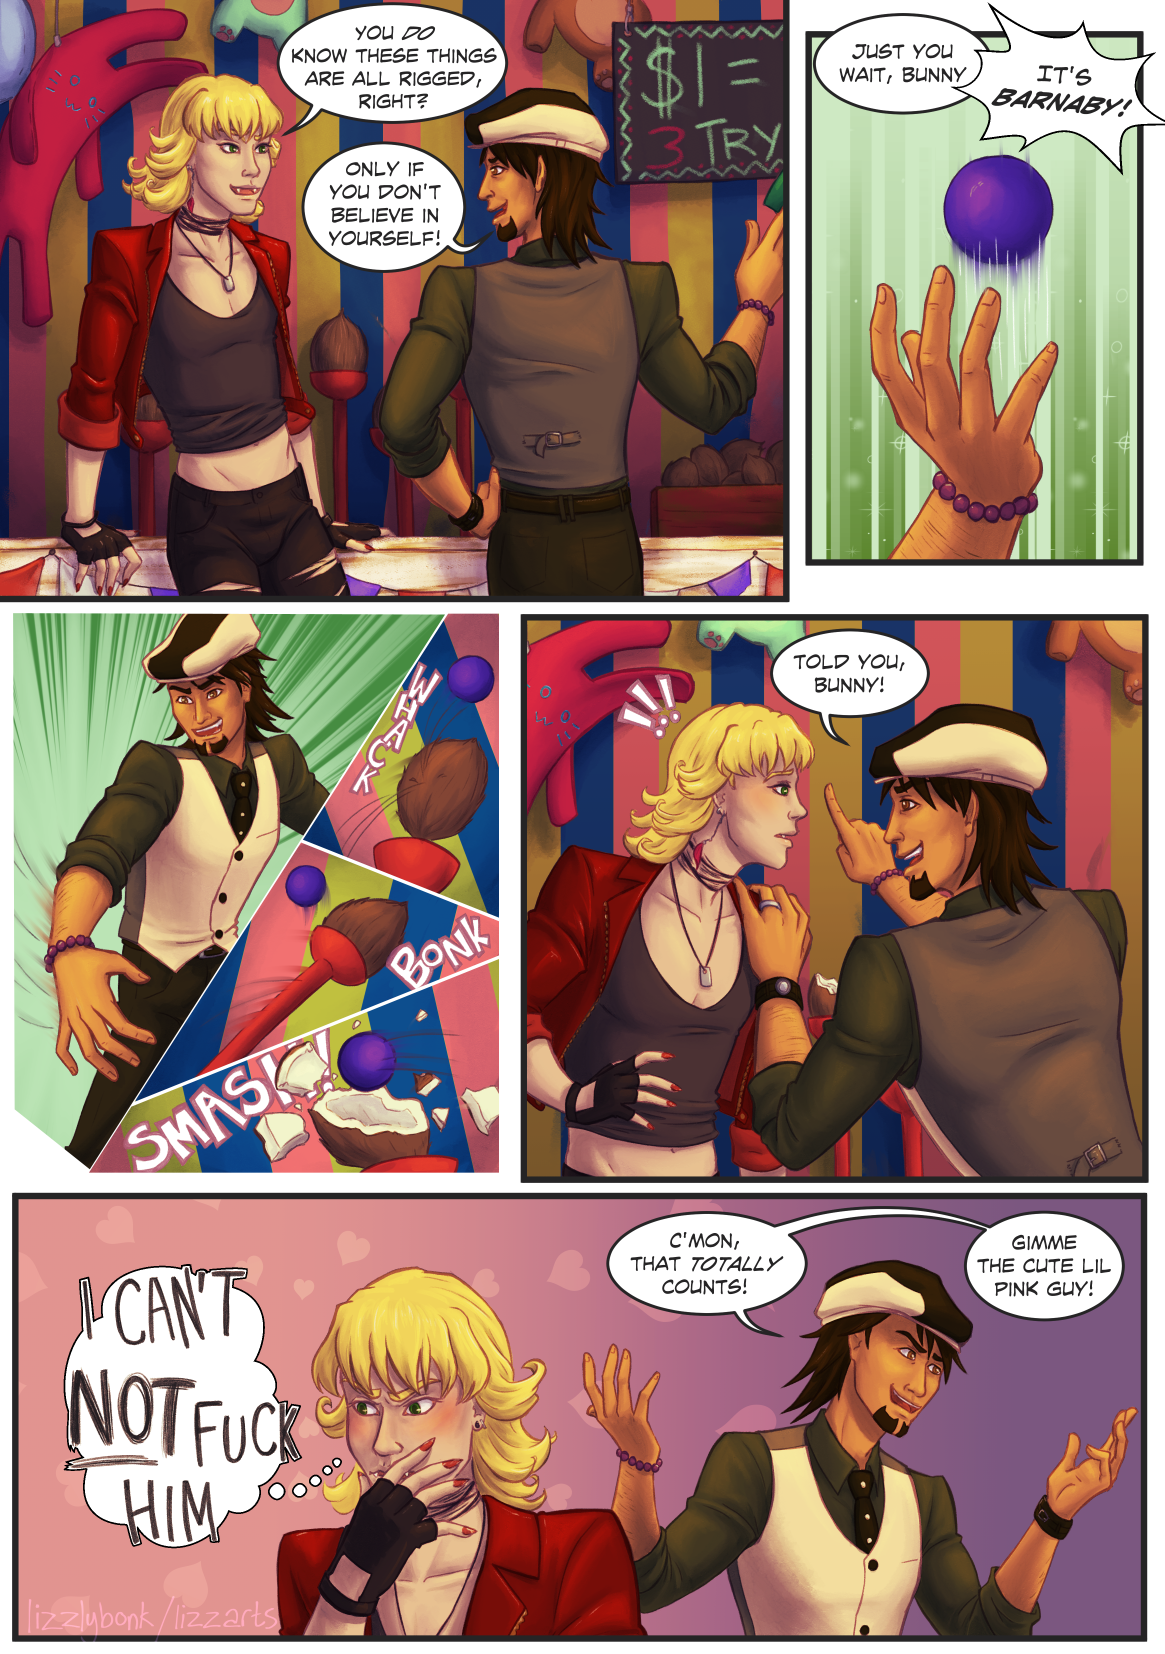 A single page comic of Kotetsu and Barnaby at a carnival. I promise I will finish this alt text later.